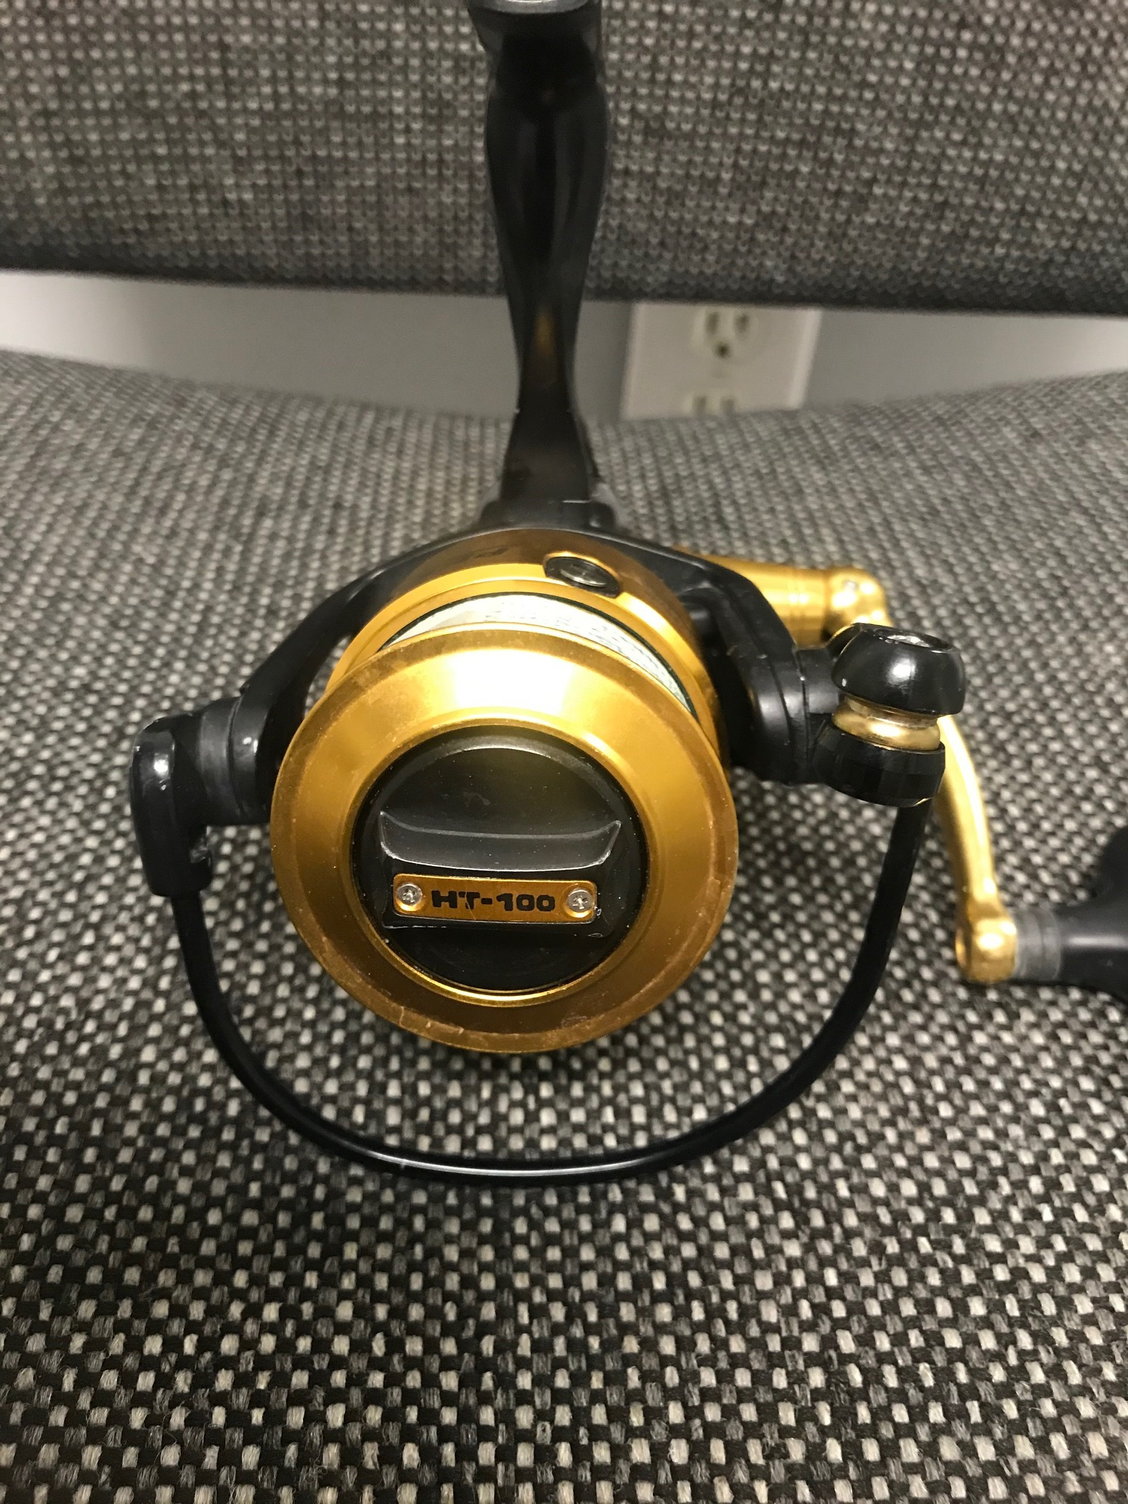 Penn Spinfisher 7500SS Fishing Reel - How to take apart, service